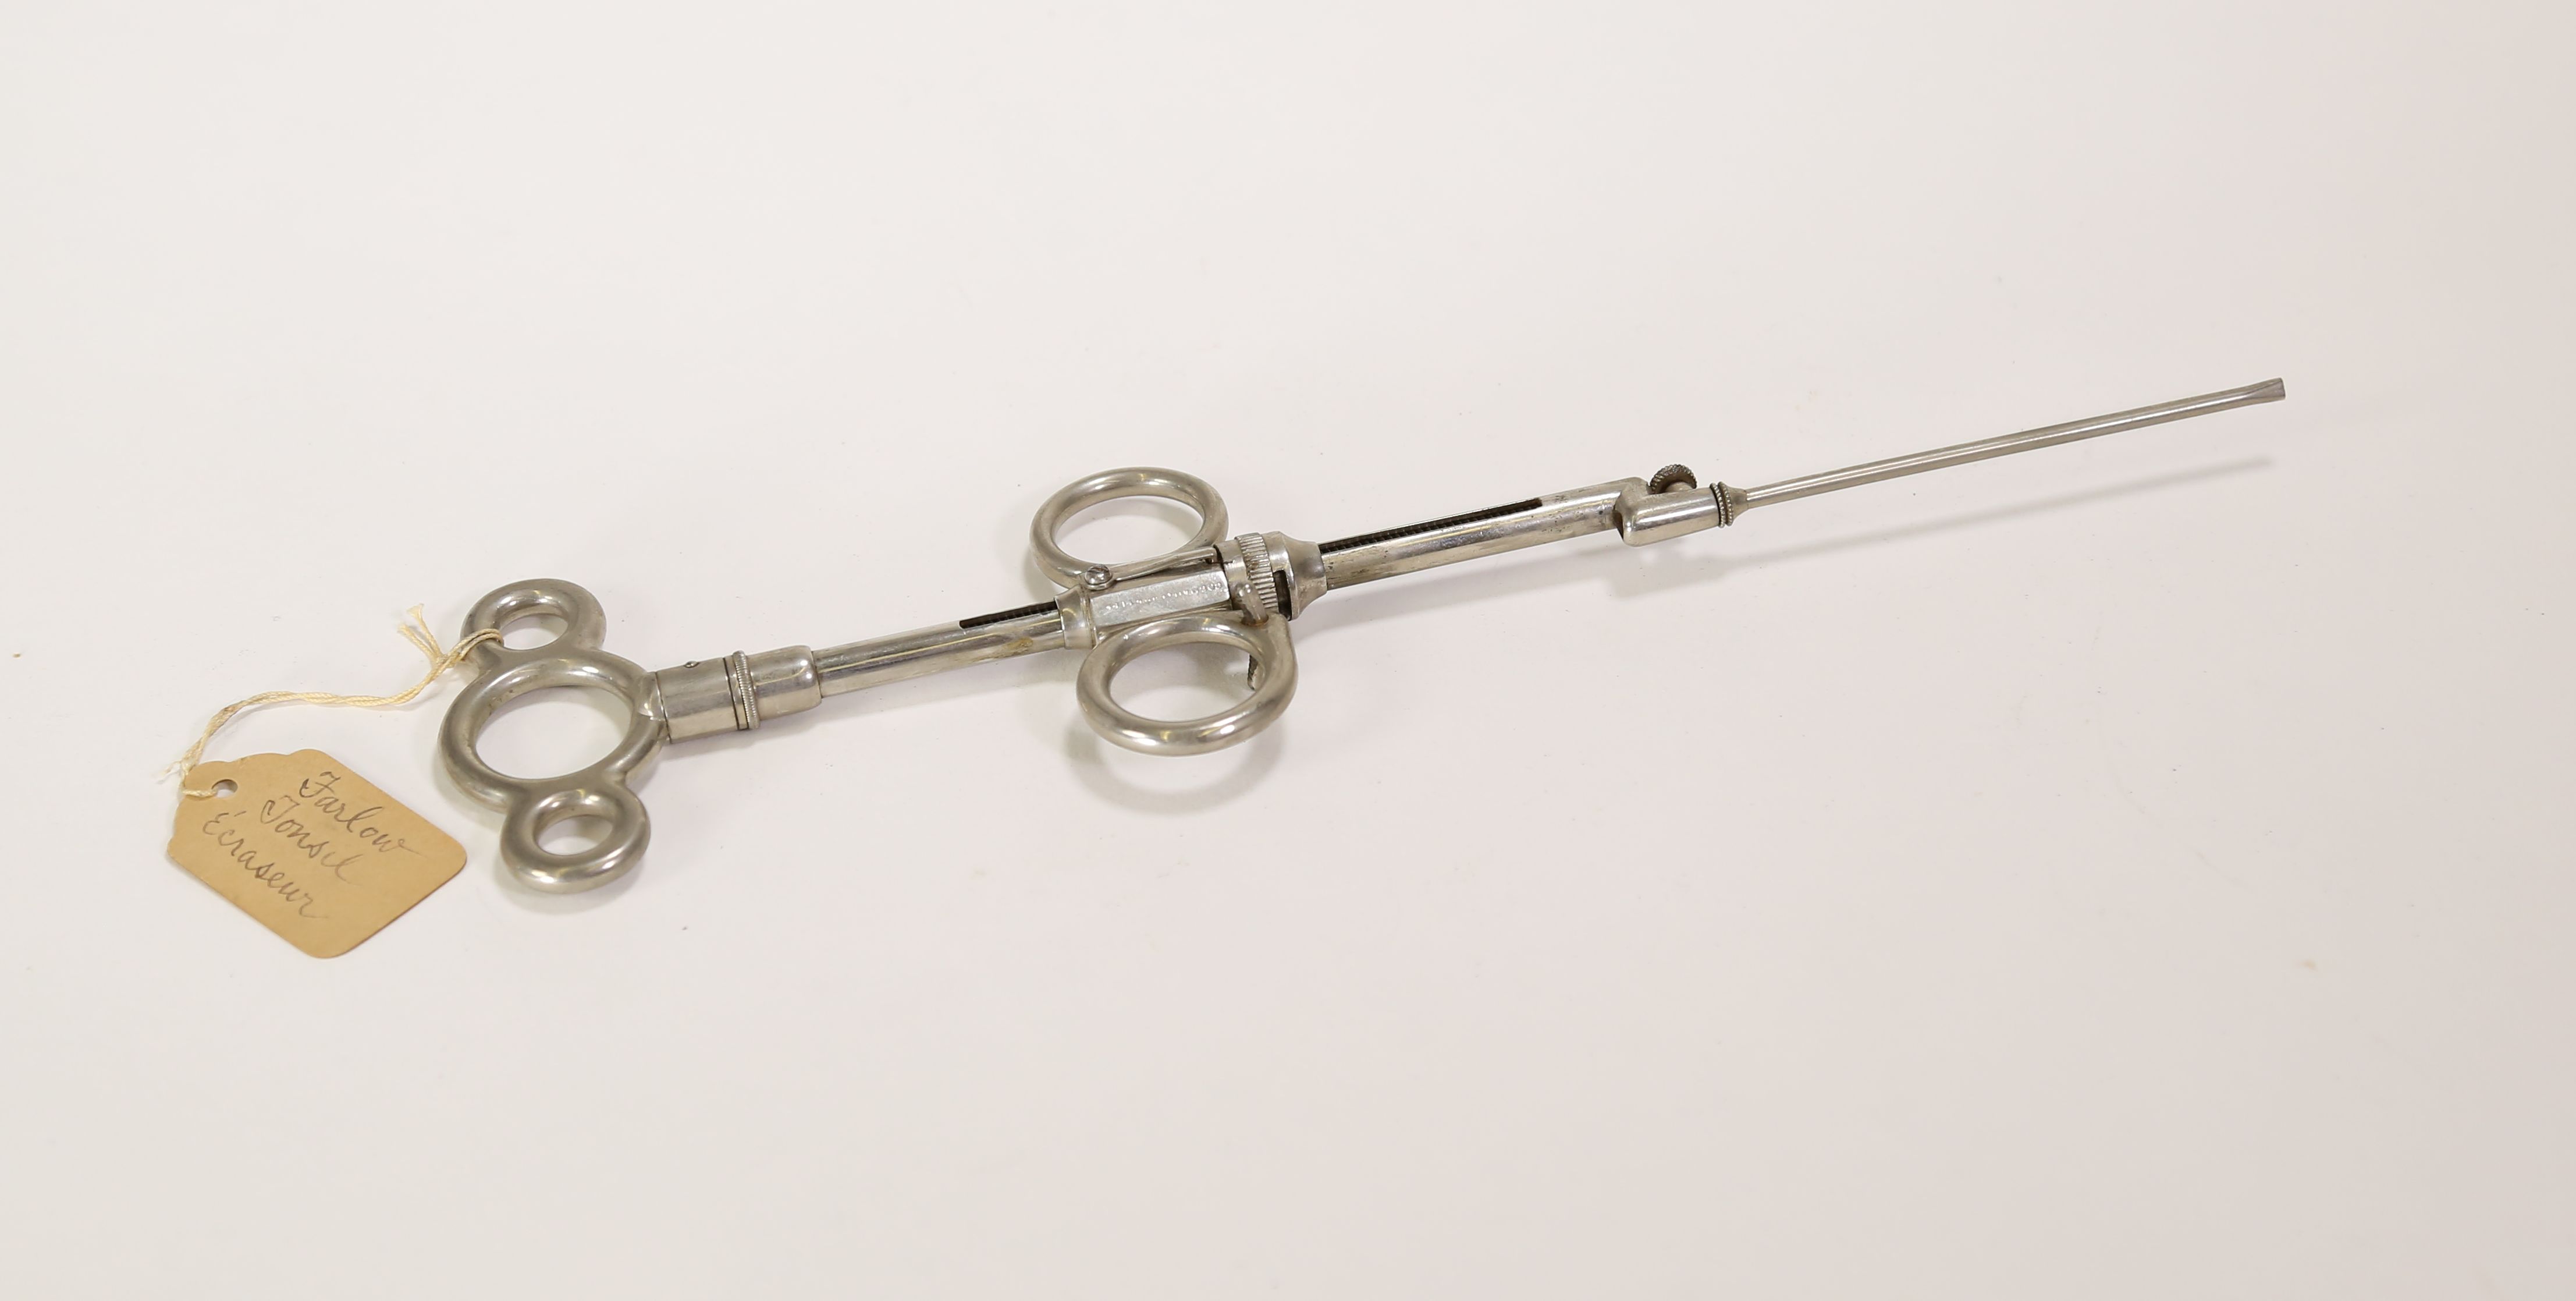 A long, handheld metal medical instrument created by J. W. Farlow in the early 20th century for removing tonsils